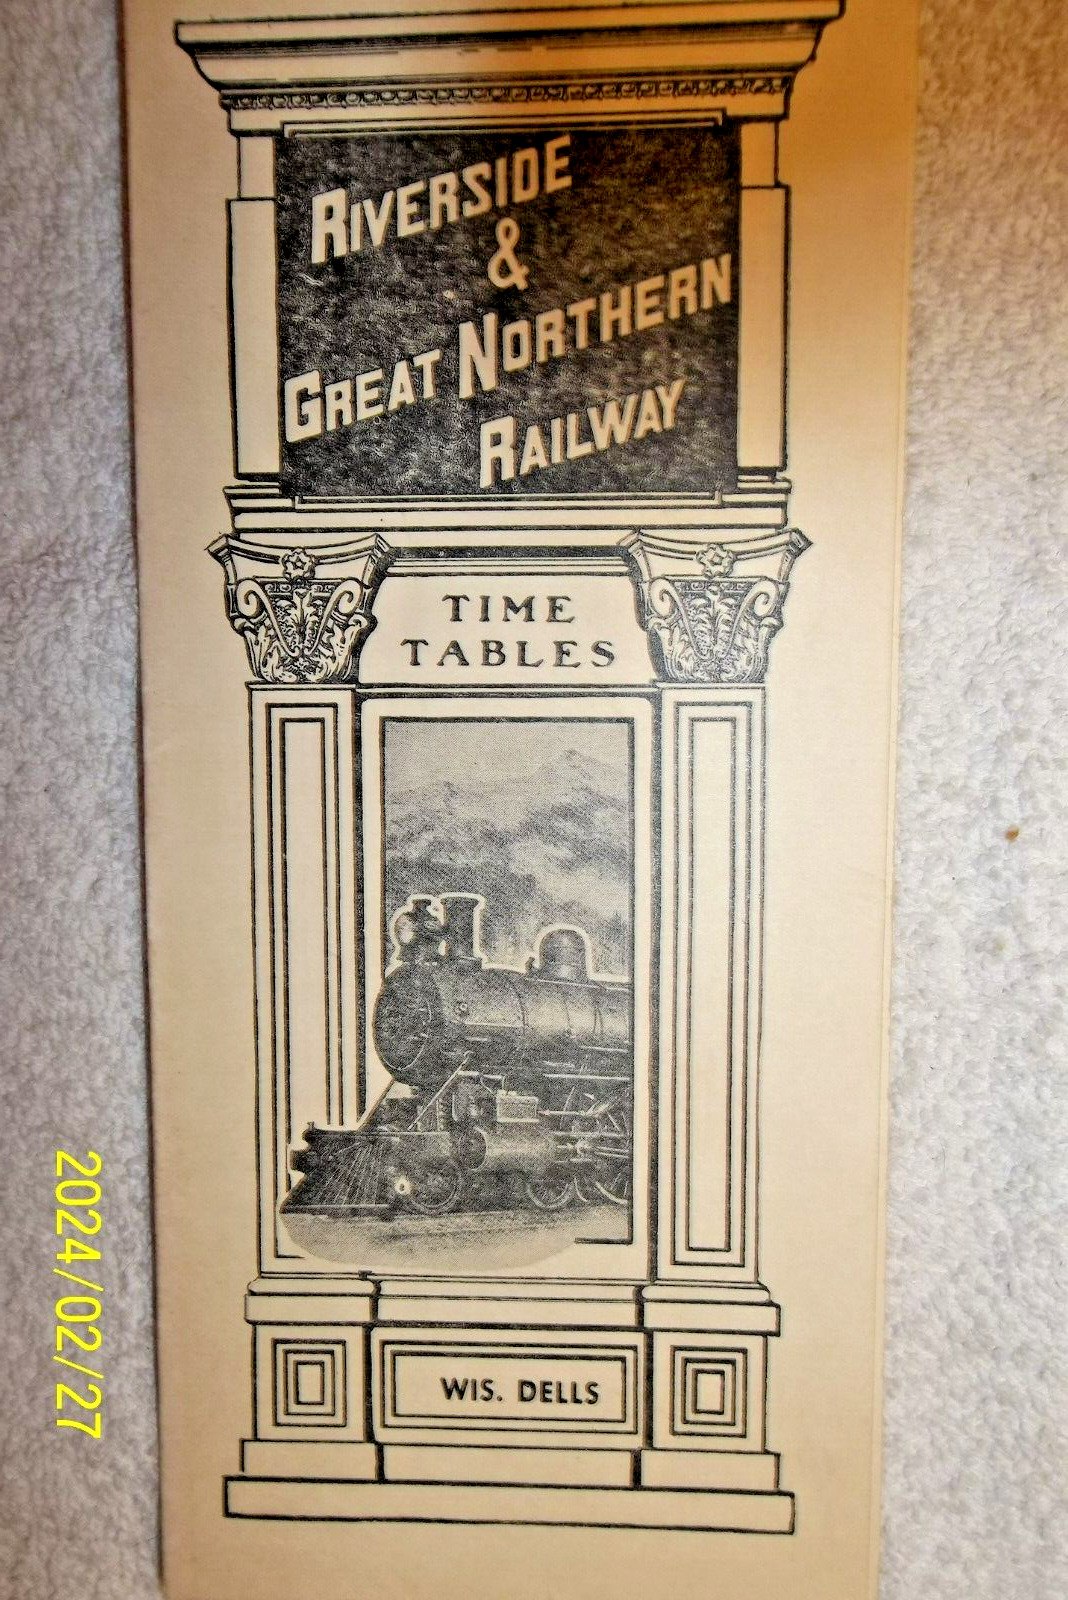 WISCONSIN DELLS RIVERSIDE & JULY 1953 GREAT NORTHERN RAILWAY TIMETABLE